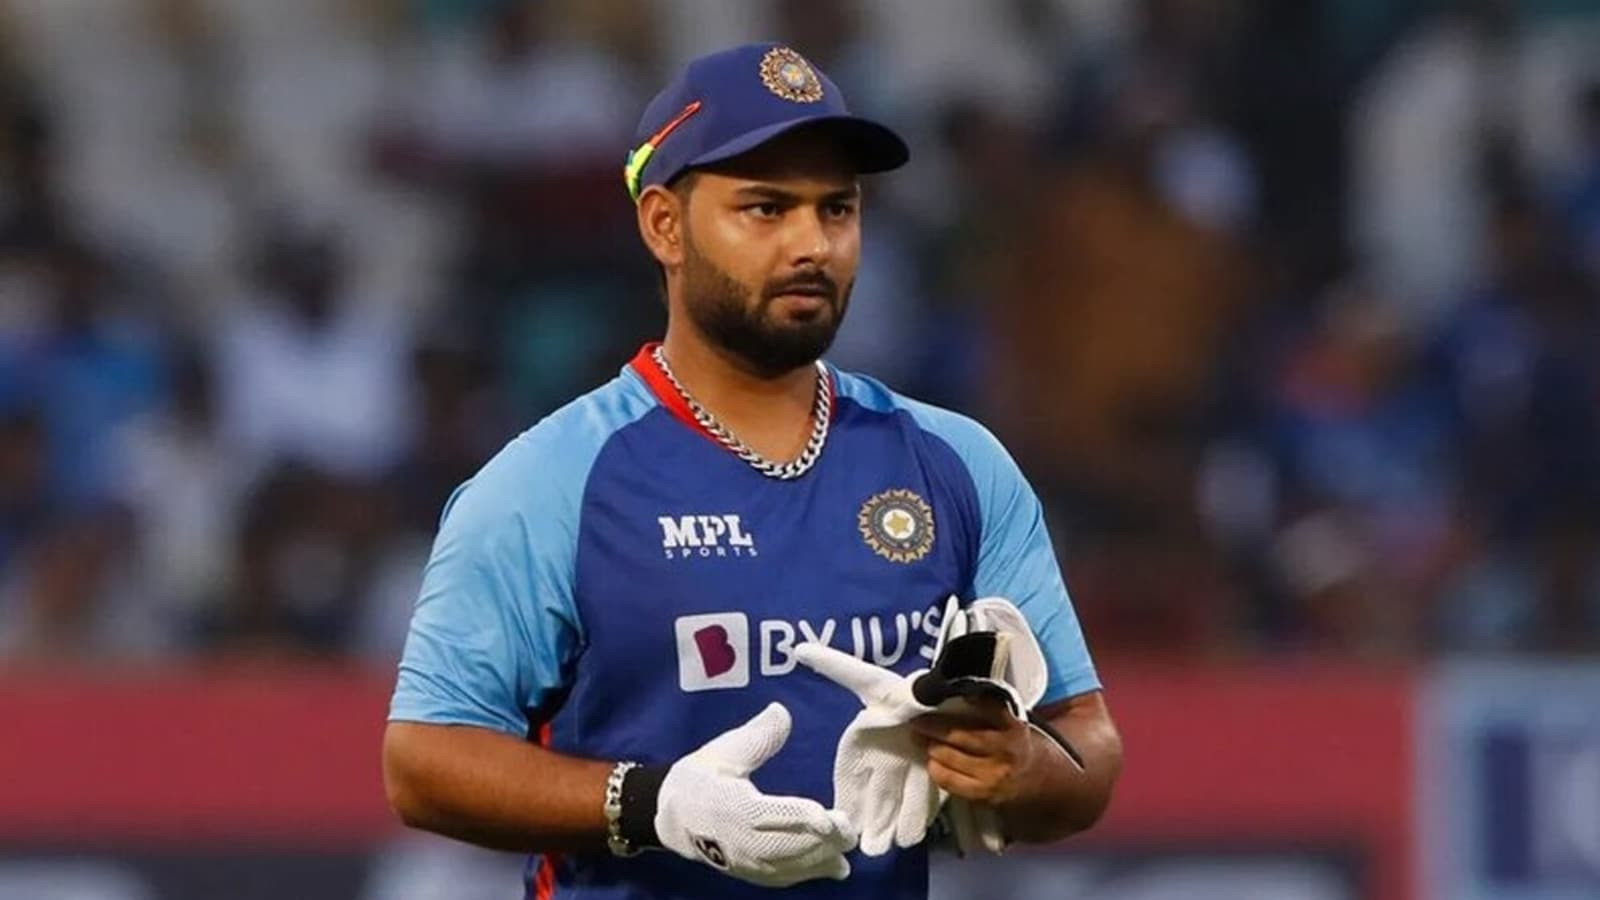 Rishabh Pant’s ligament treatment to be overseen by BCCI medical team: Report